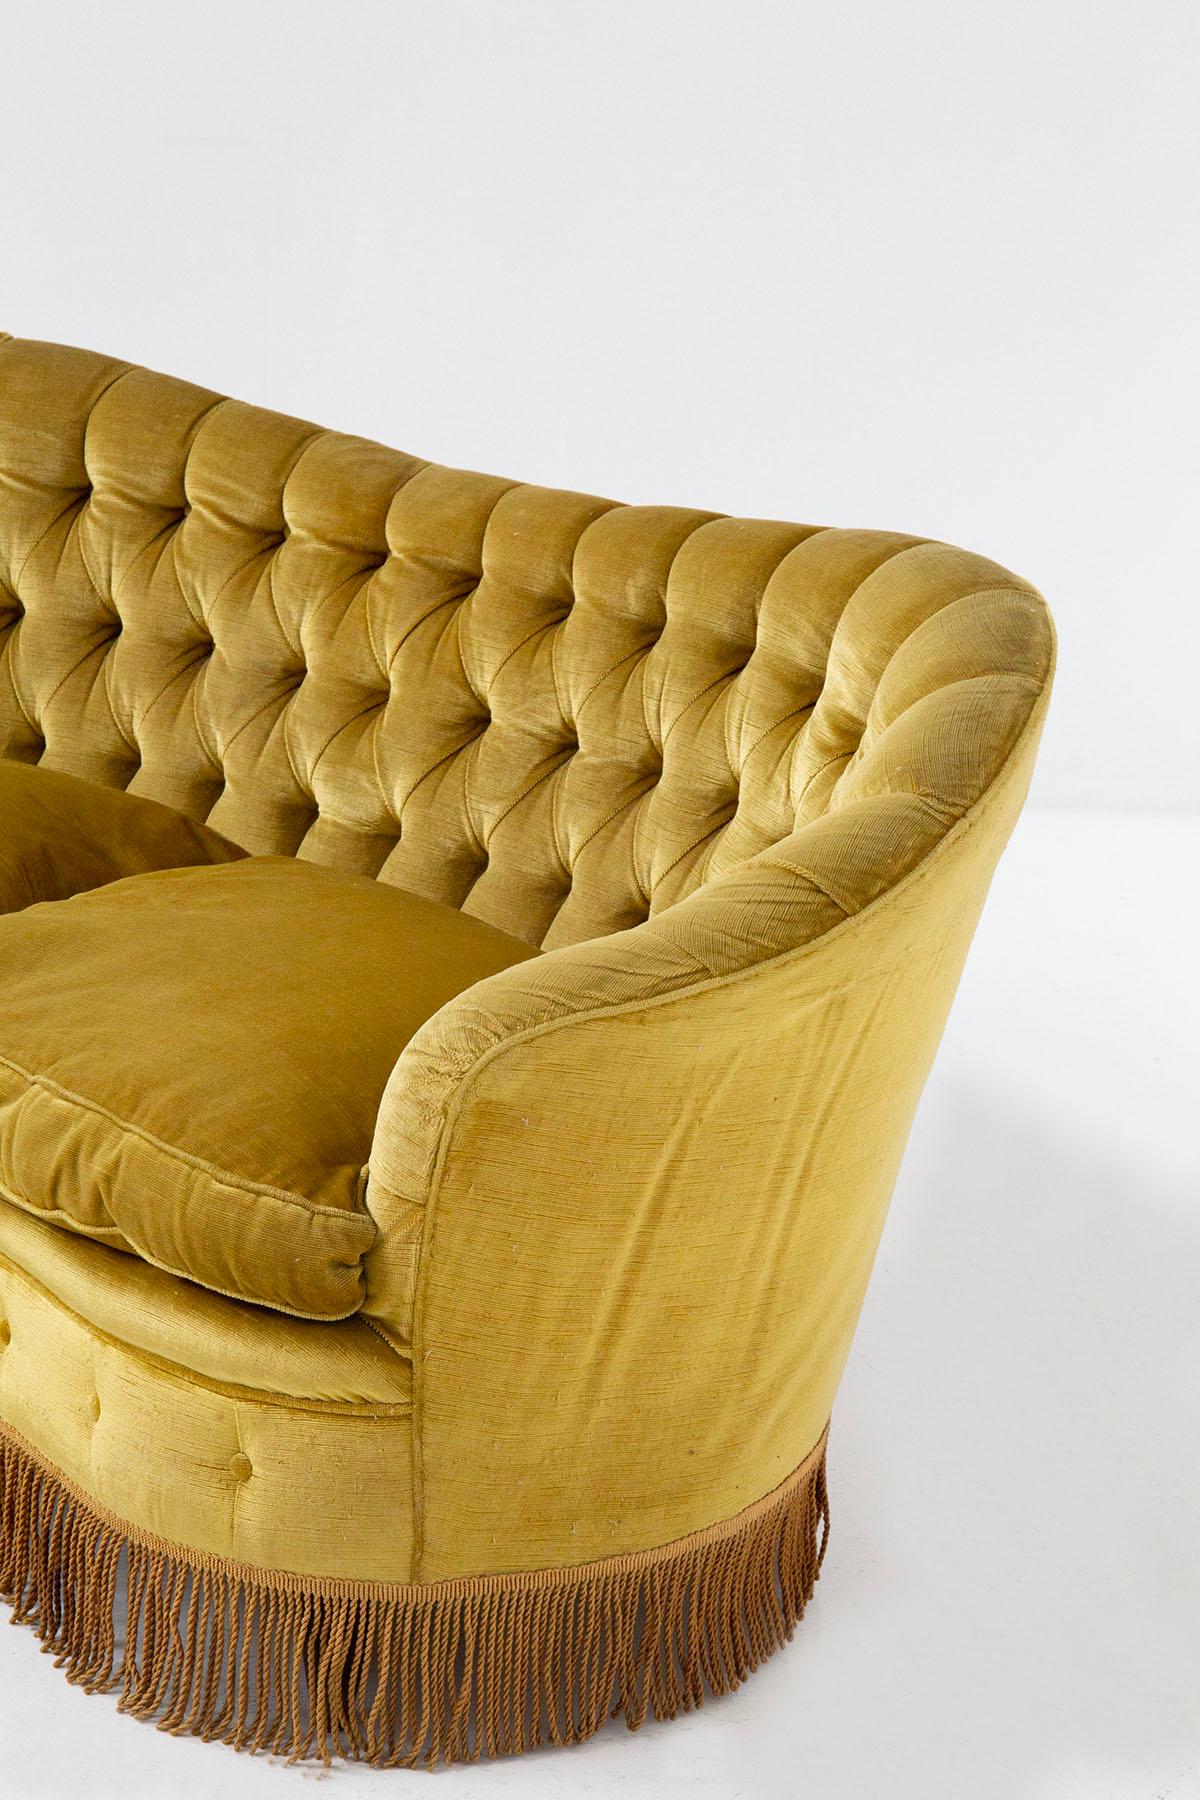 Beautiful sofa attributed to the great designer Gio Ponti for the Italian manufacturer Casa e Giardino in the 1950s. The fabric is an original golden yellow velvet of the time.
The internal structure is made of a beautiful solid wood that can